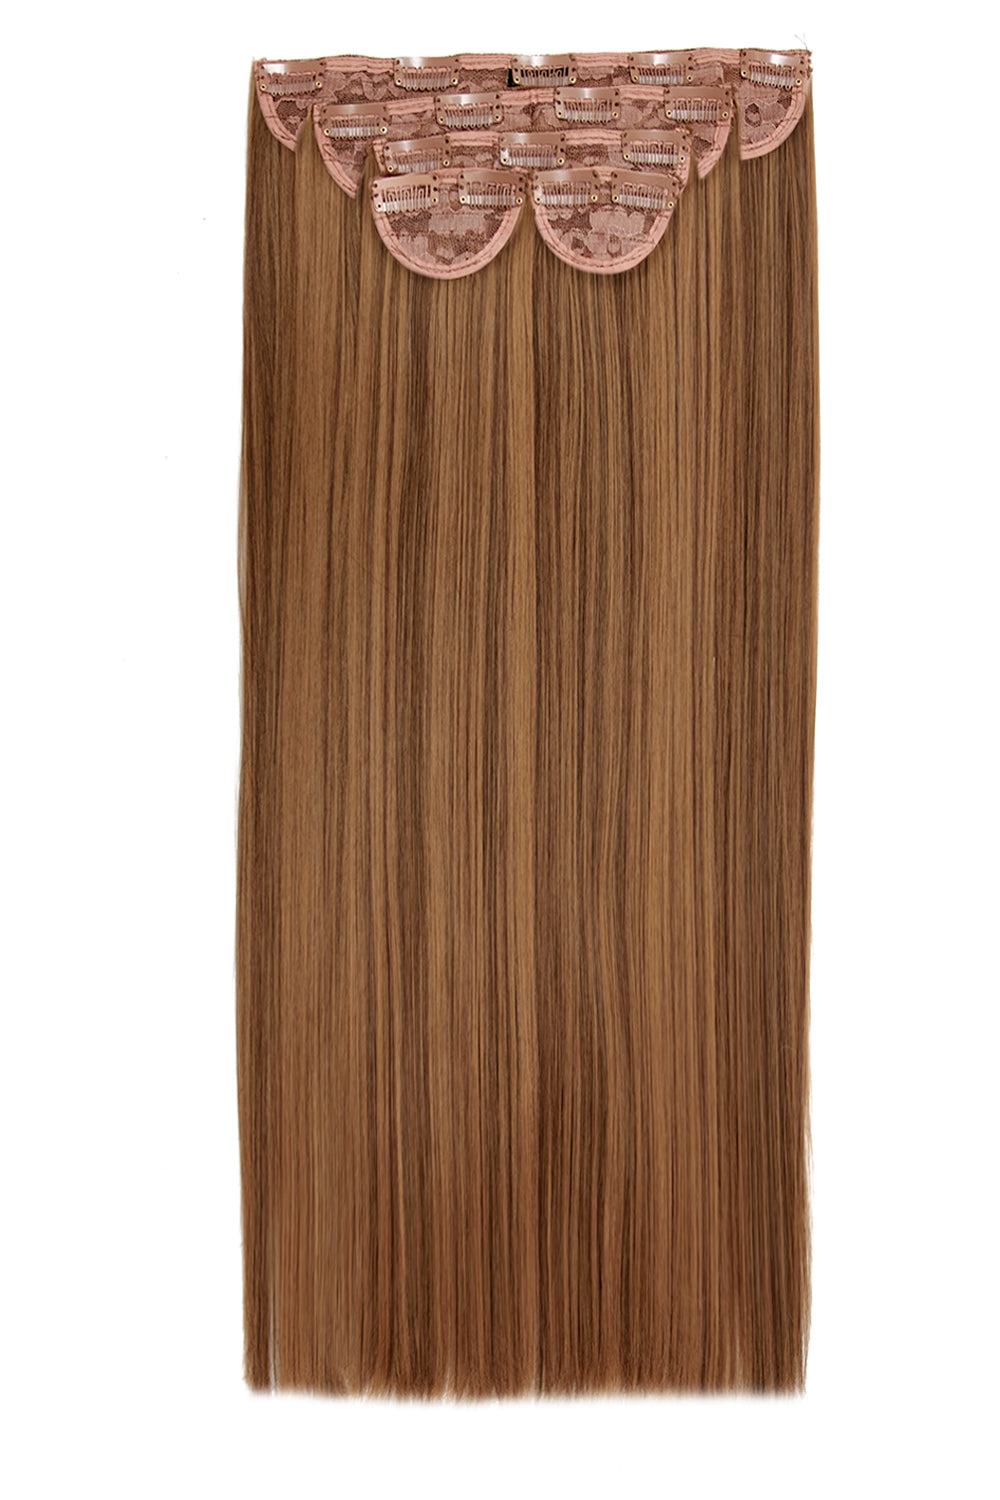 Super Thick 26" 5 Piece Straight Clip in Hair Extensions + Hair Care Bundle - Toffee Brown